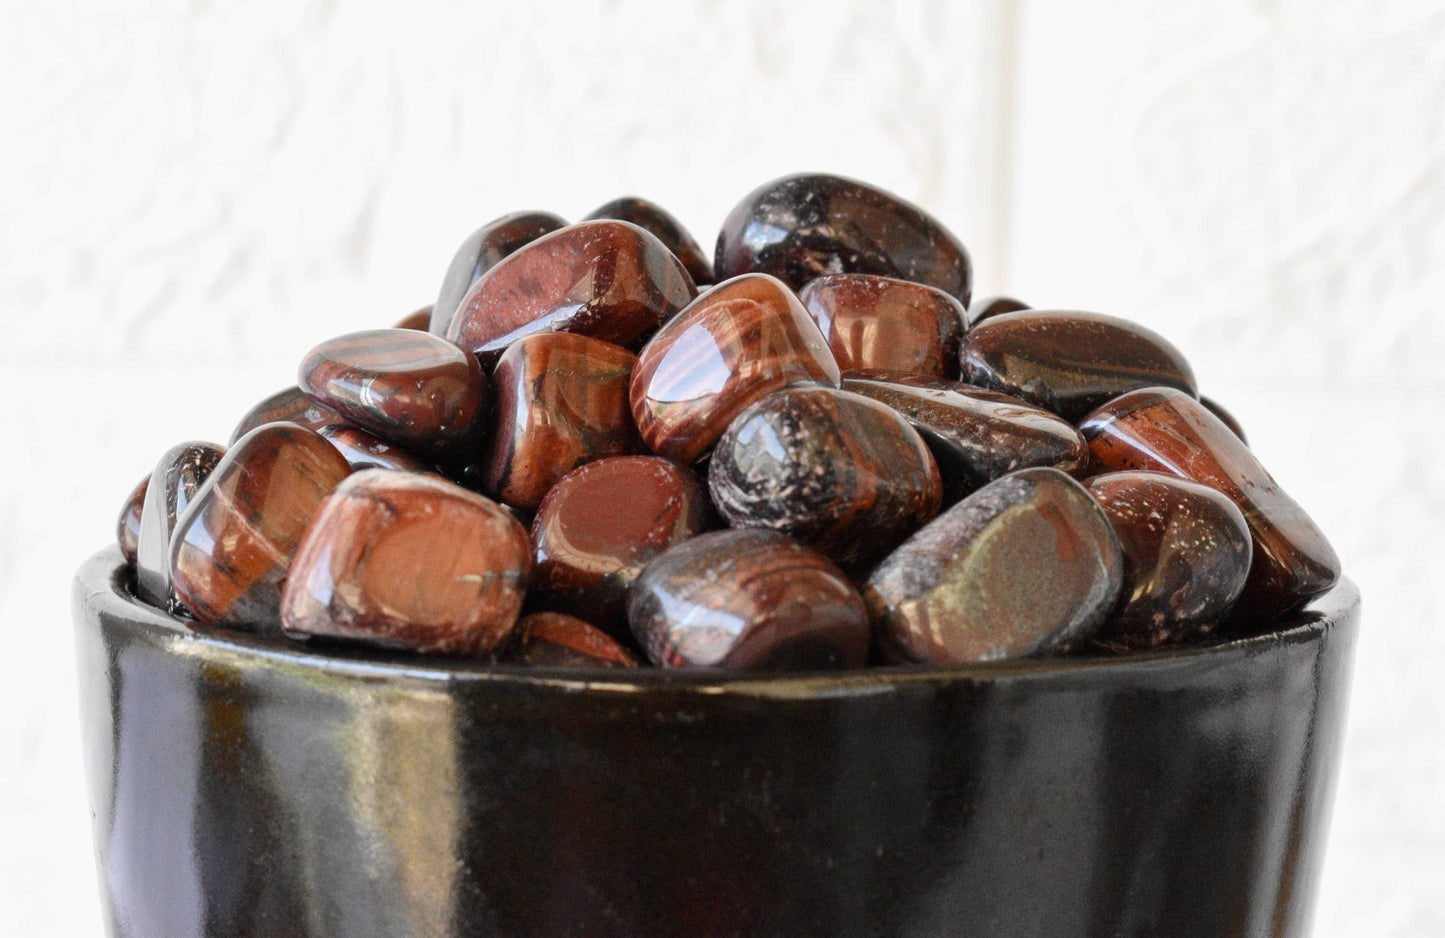 Red Tiger Eye Tumbled Crystals (Self Discovery and Self-Discipline)